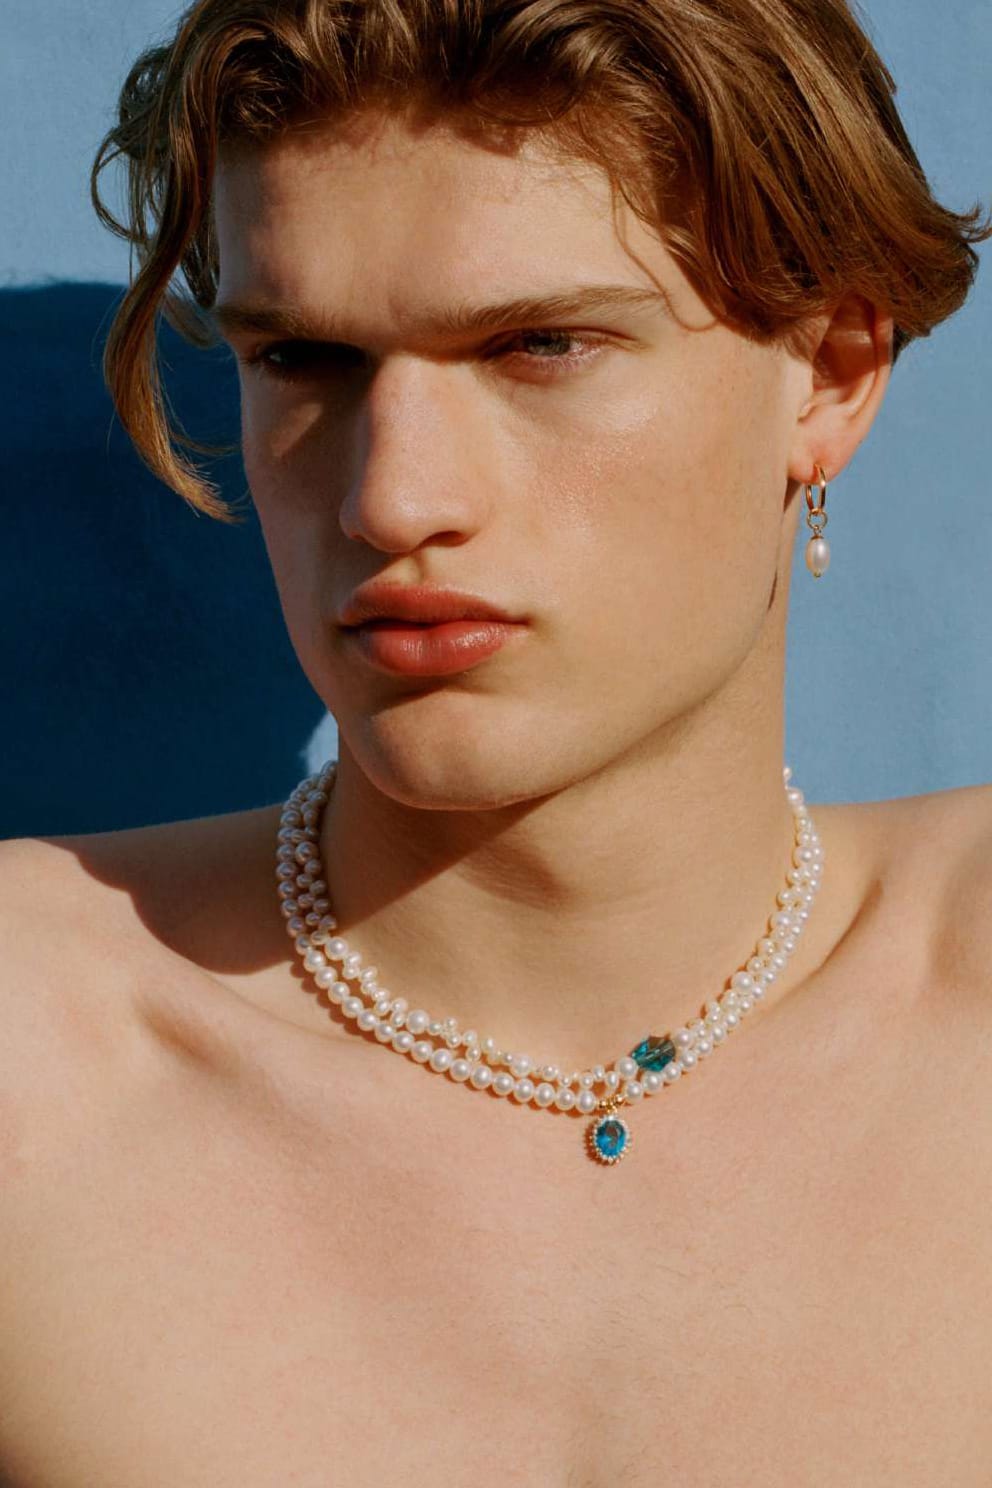 Men want pearls and they're not afraid to wear them | CNN Business